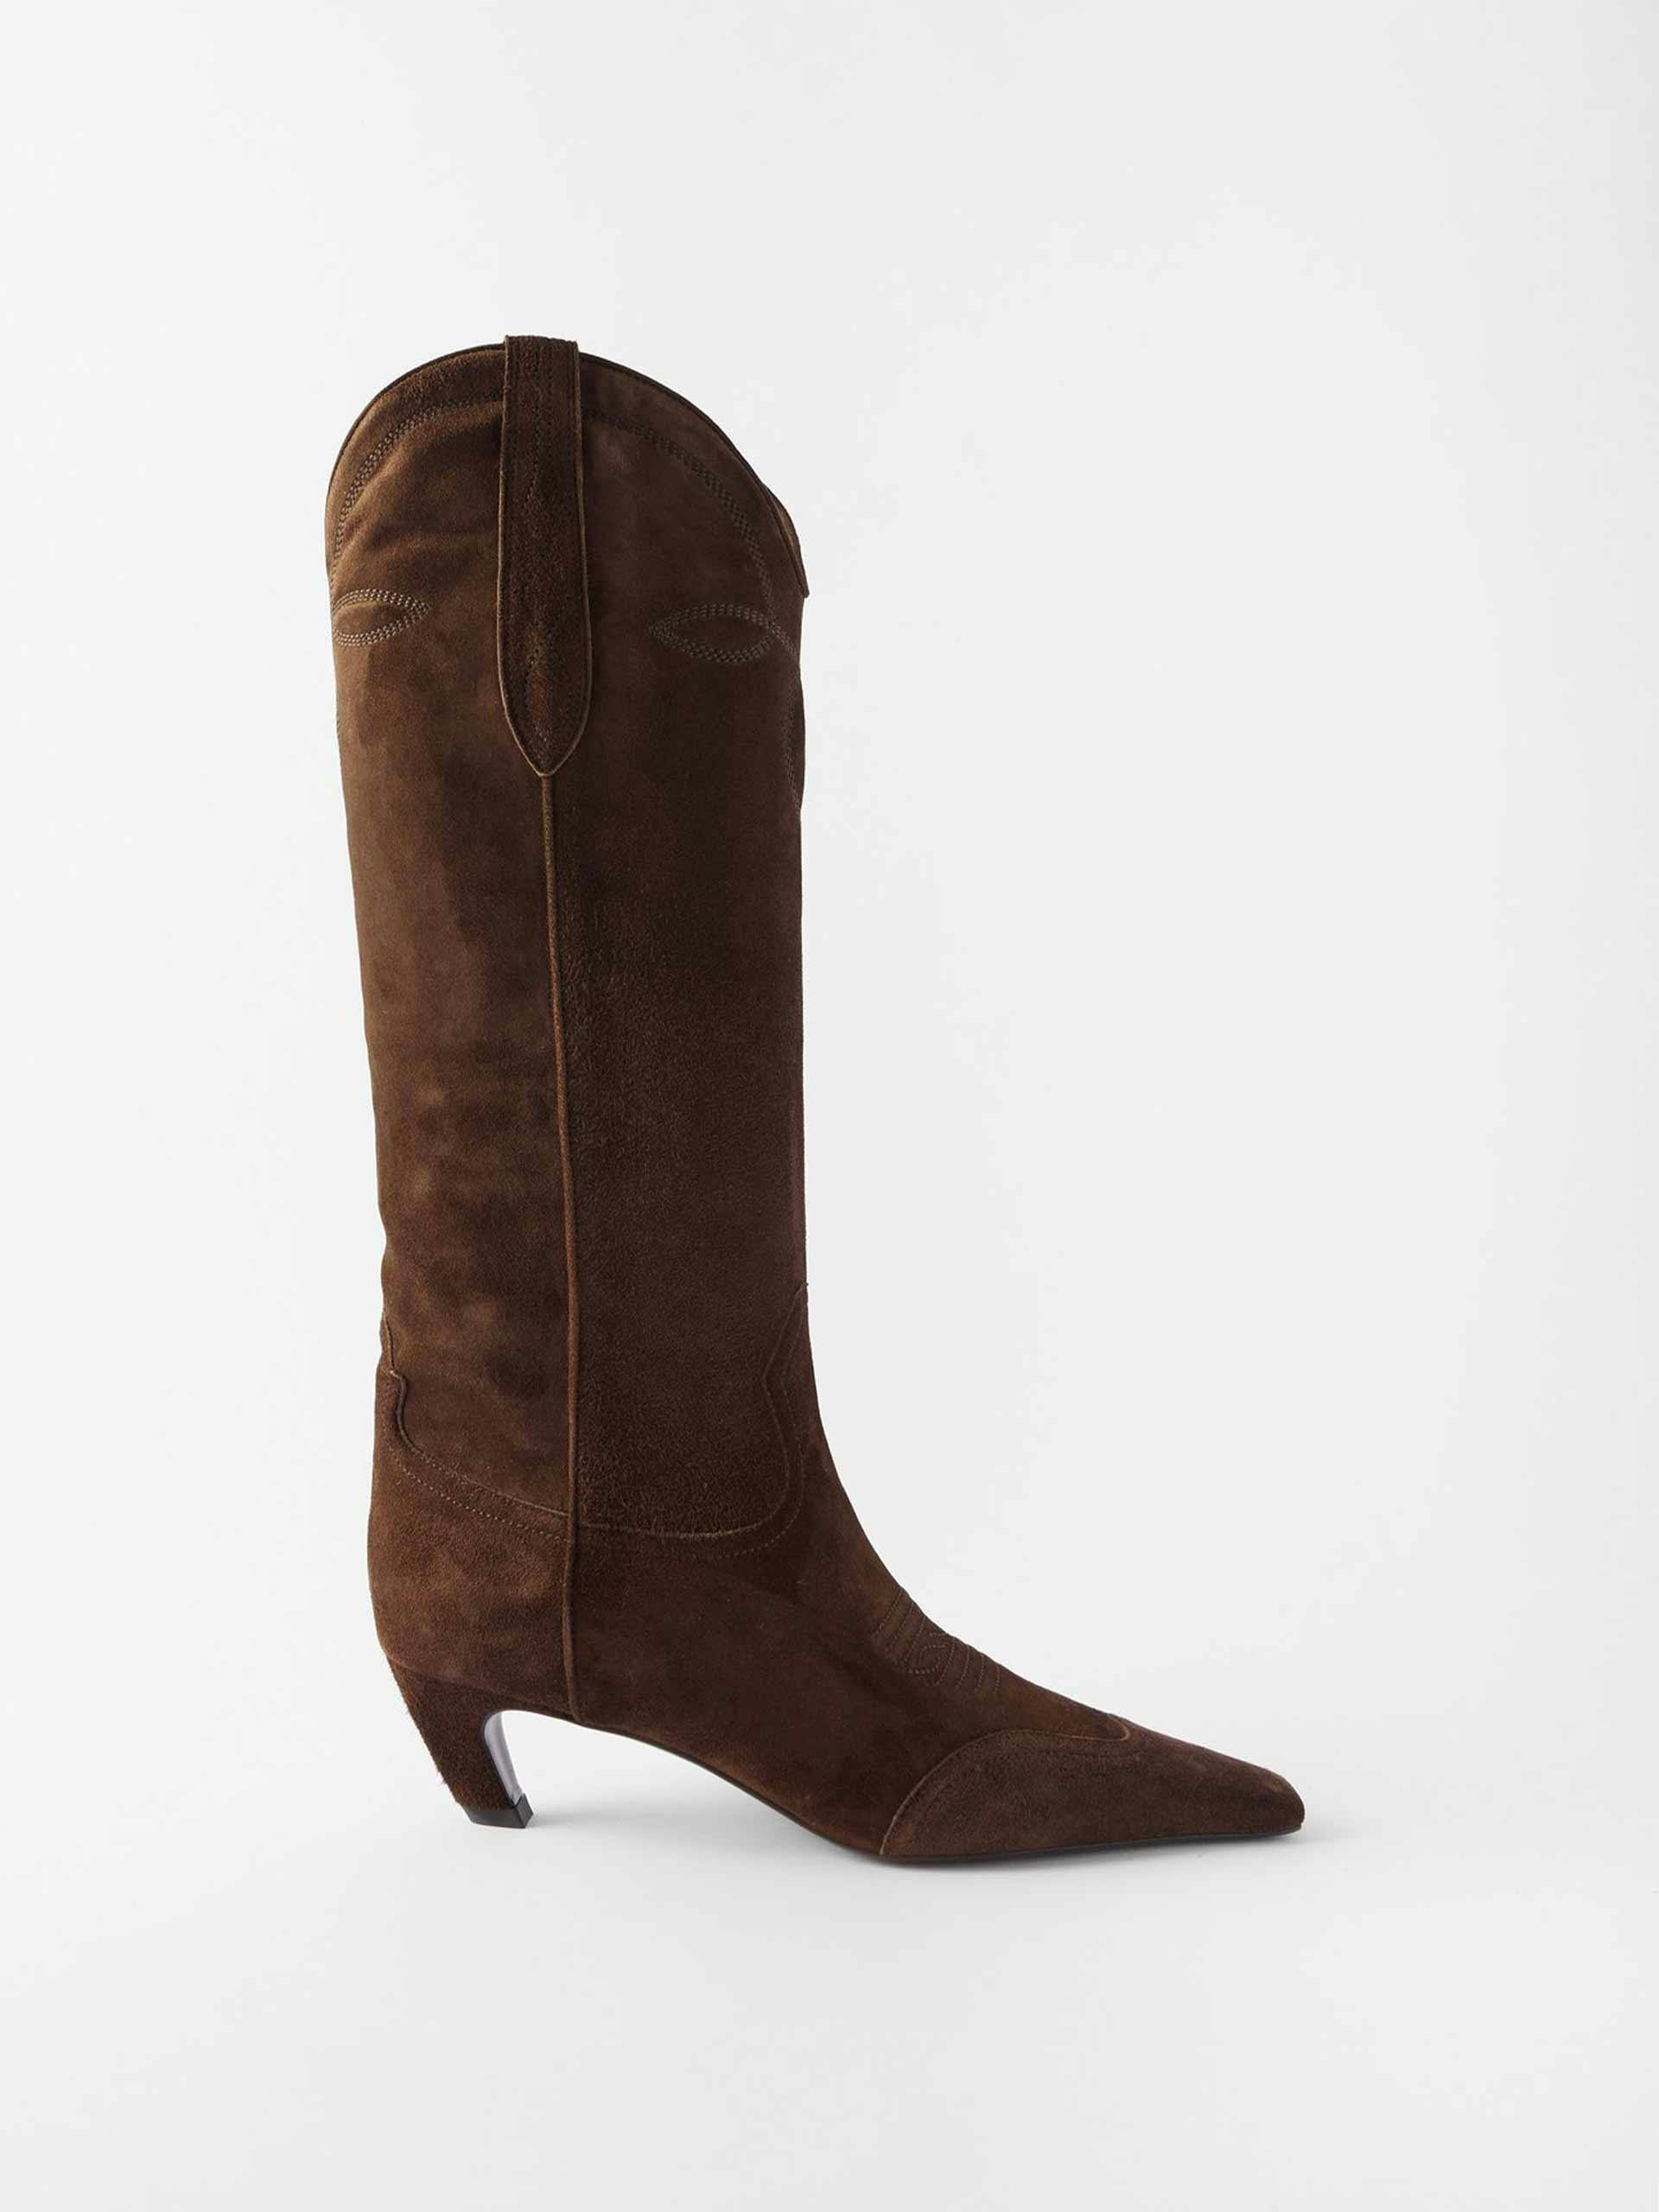 Brown suede knee-high boots